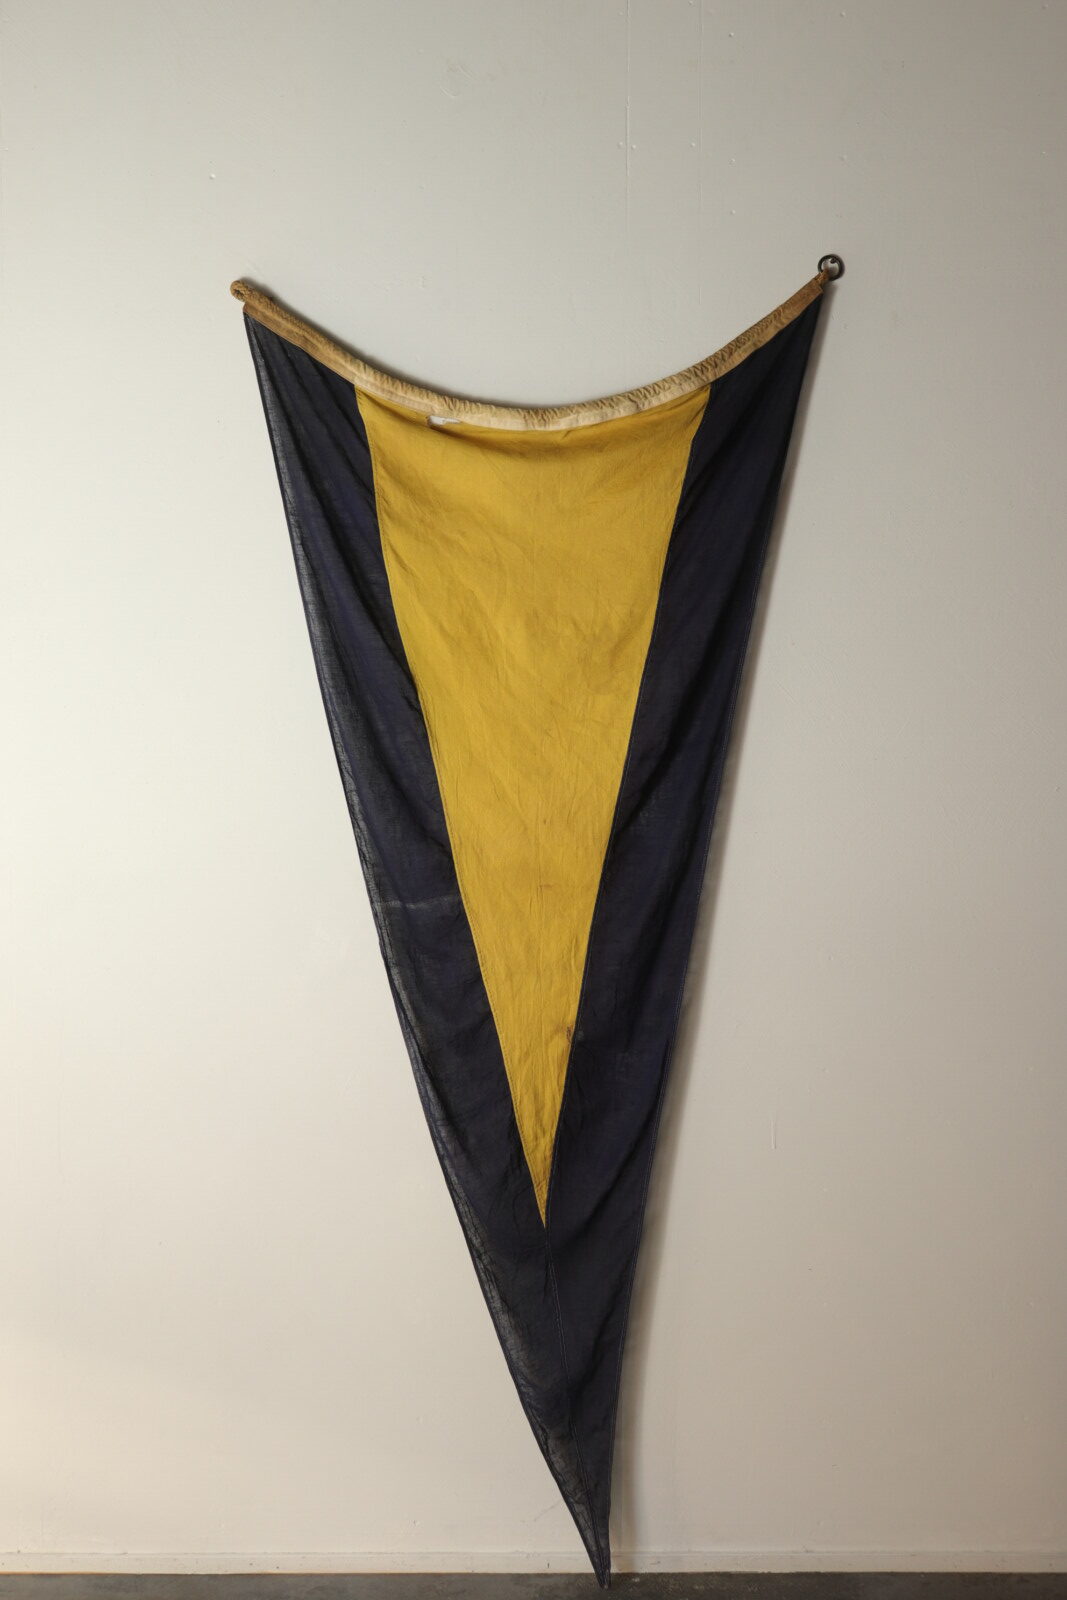 1930's,cotton code flag,USA,first repeater flag